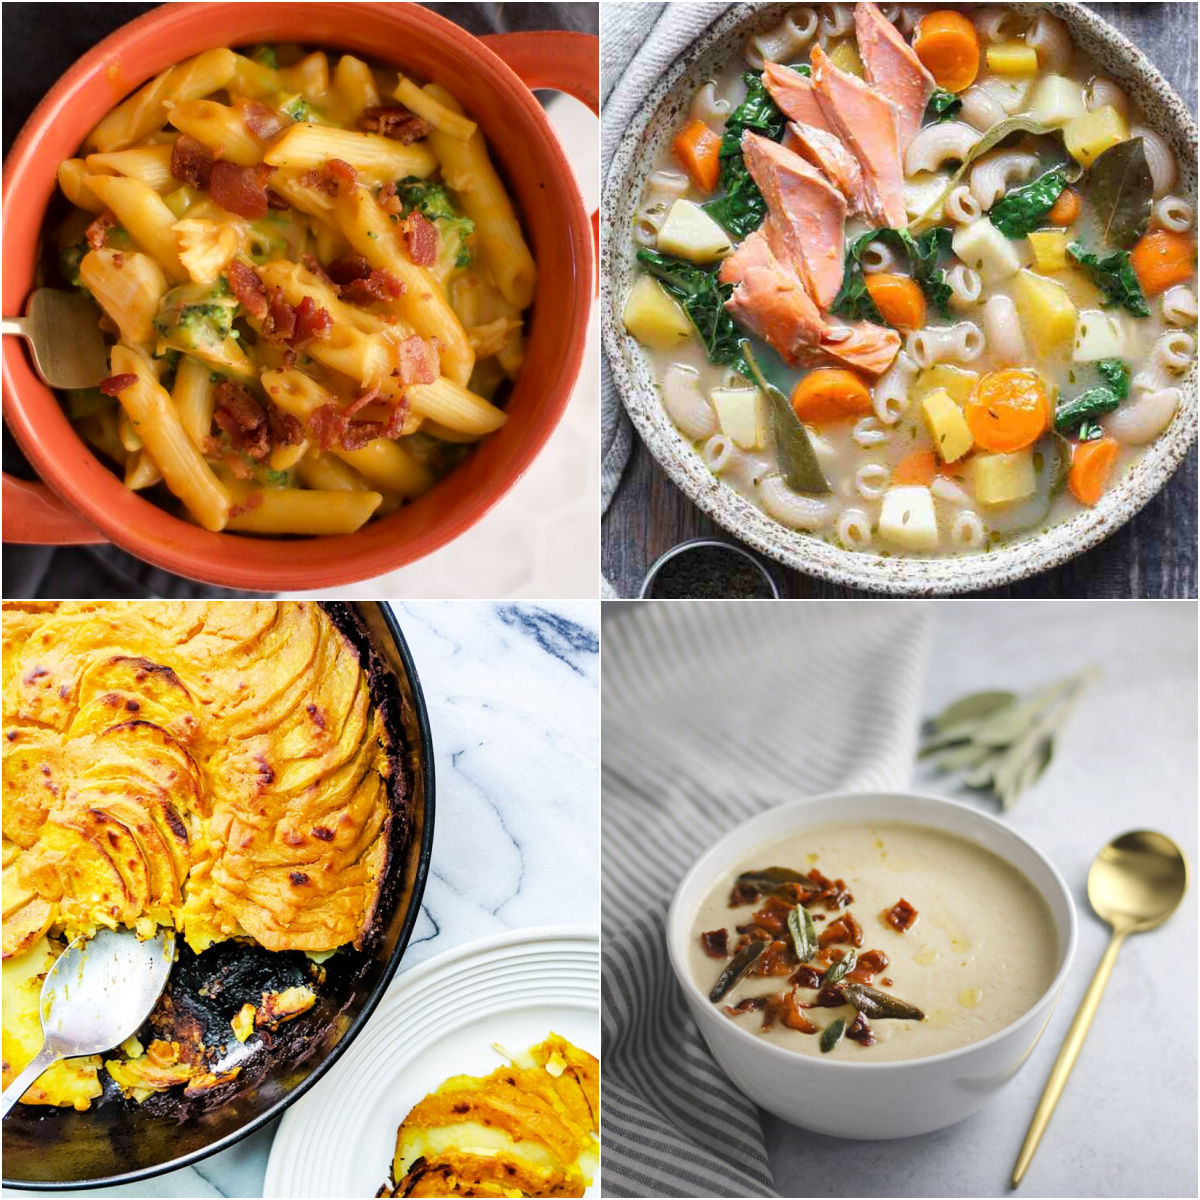 Paleo AIP Recipe Roundtable #350 | Phoenix Helix - *Featured Recipes: Macaroni and "Cheese", Scalloped Sweet Potatoes, Root Soup with Wild Salmon and Kelp, and Roasted Garlic and Cauliflower Soup with Fried Sage